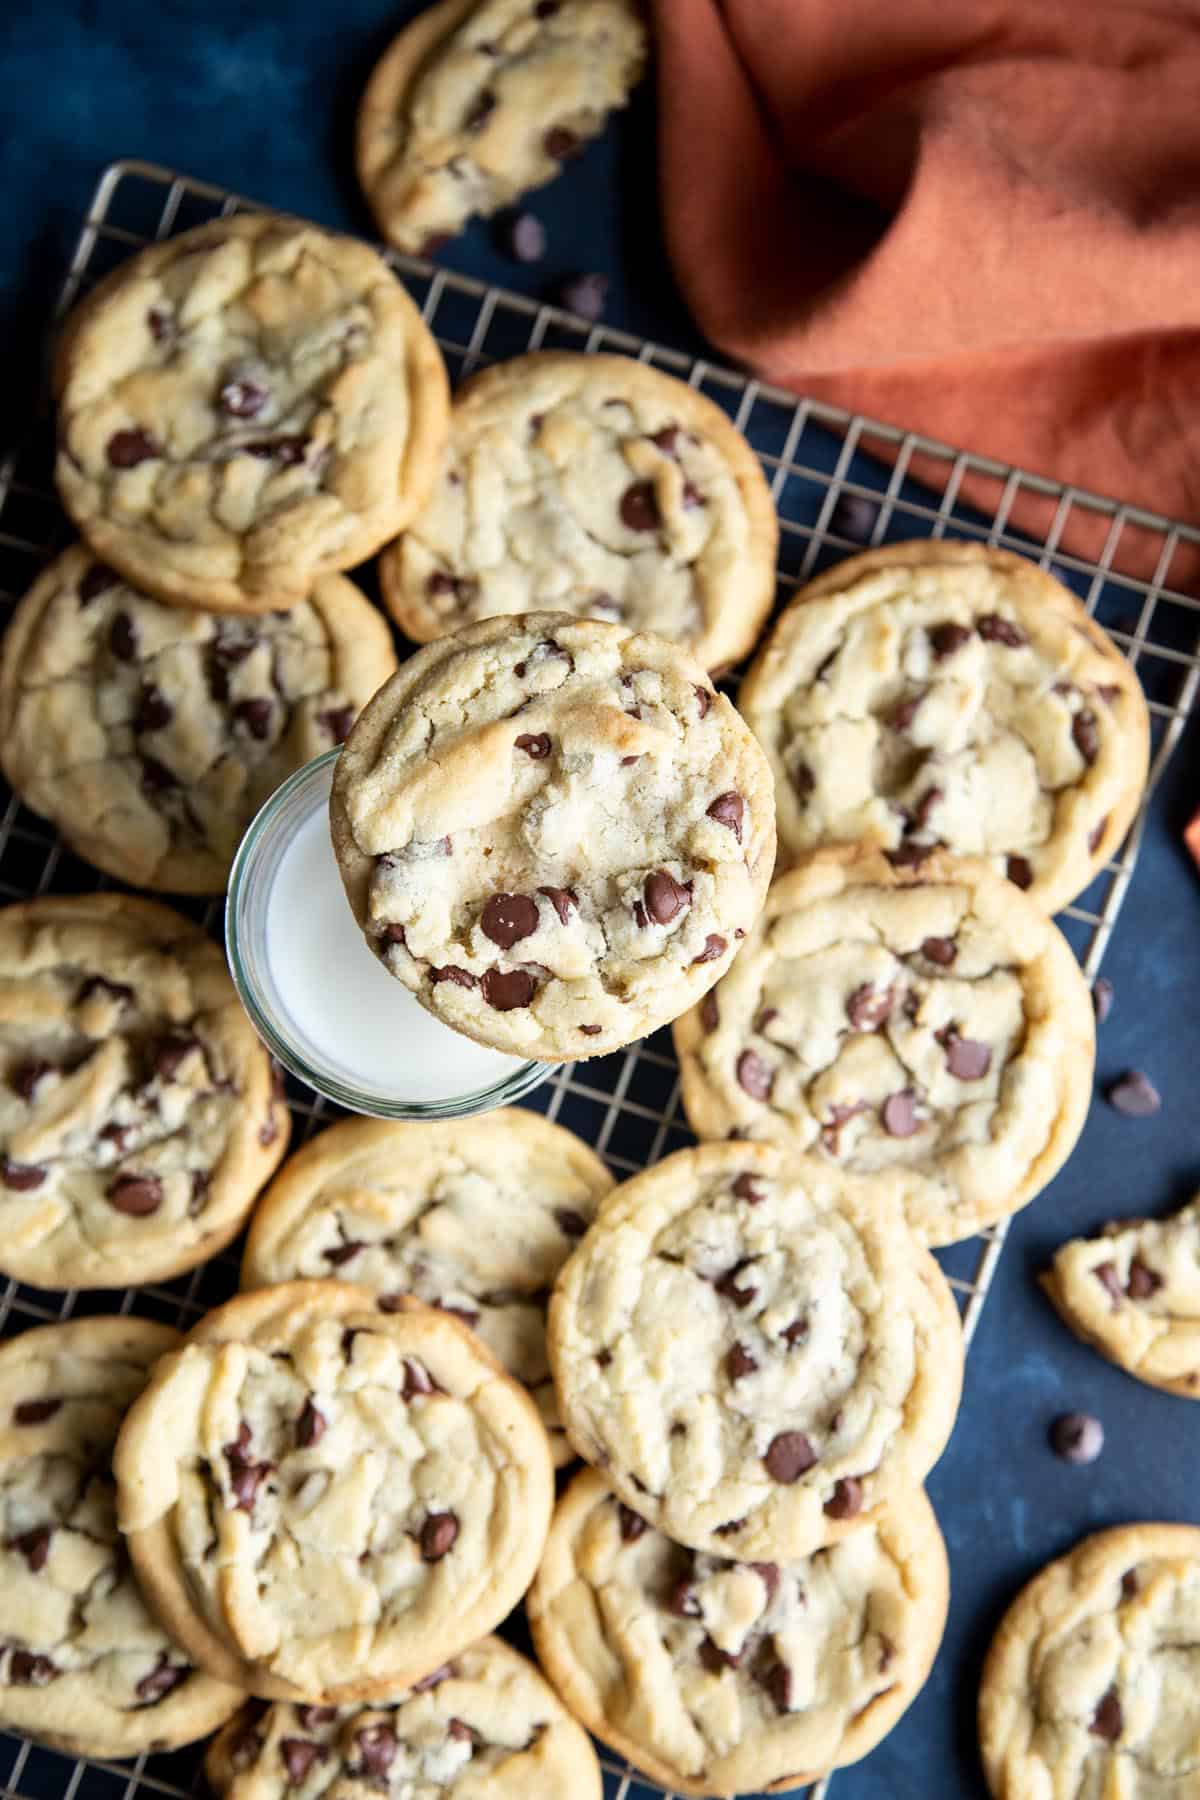 Chocolate chip cookies on a wire rack with a glass of milk.